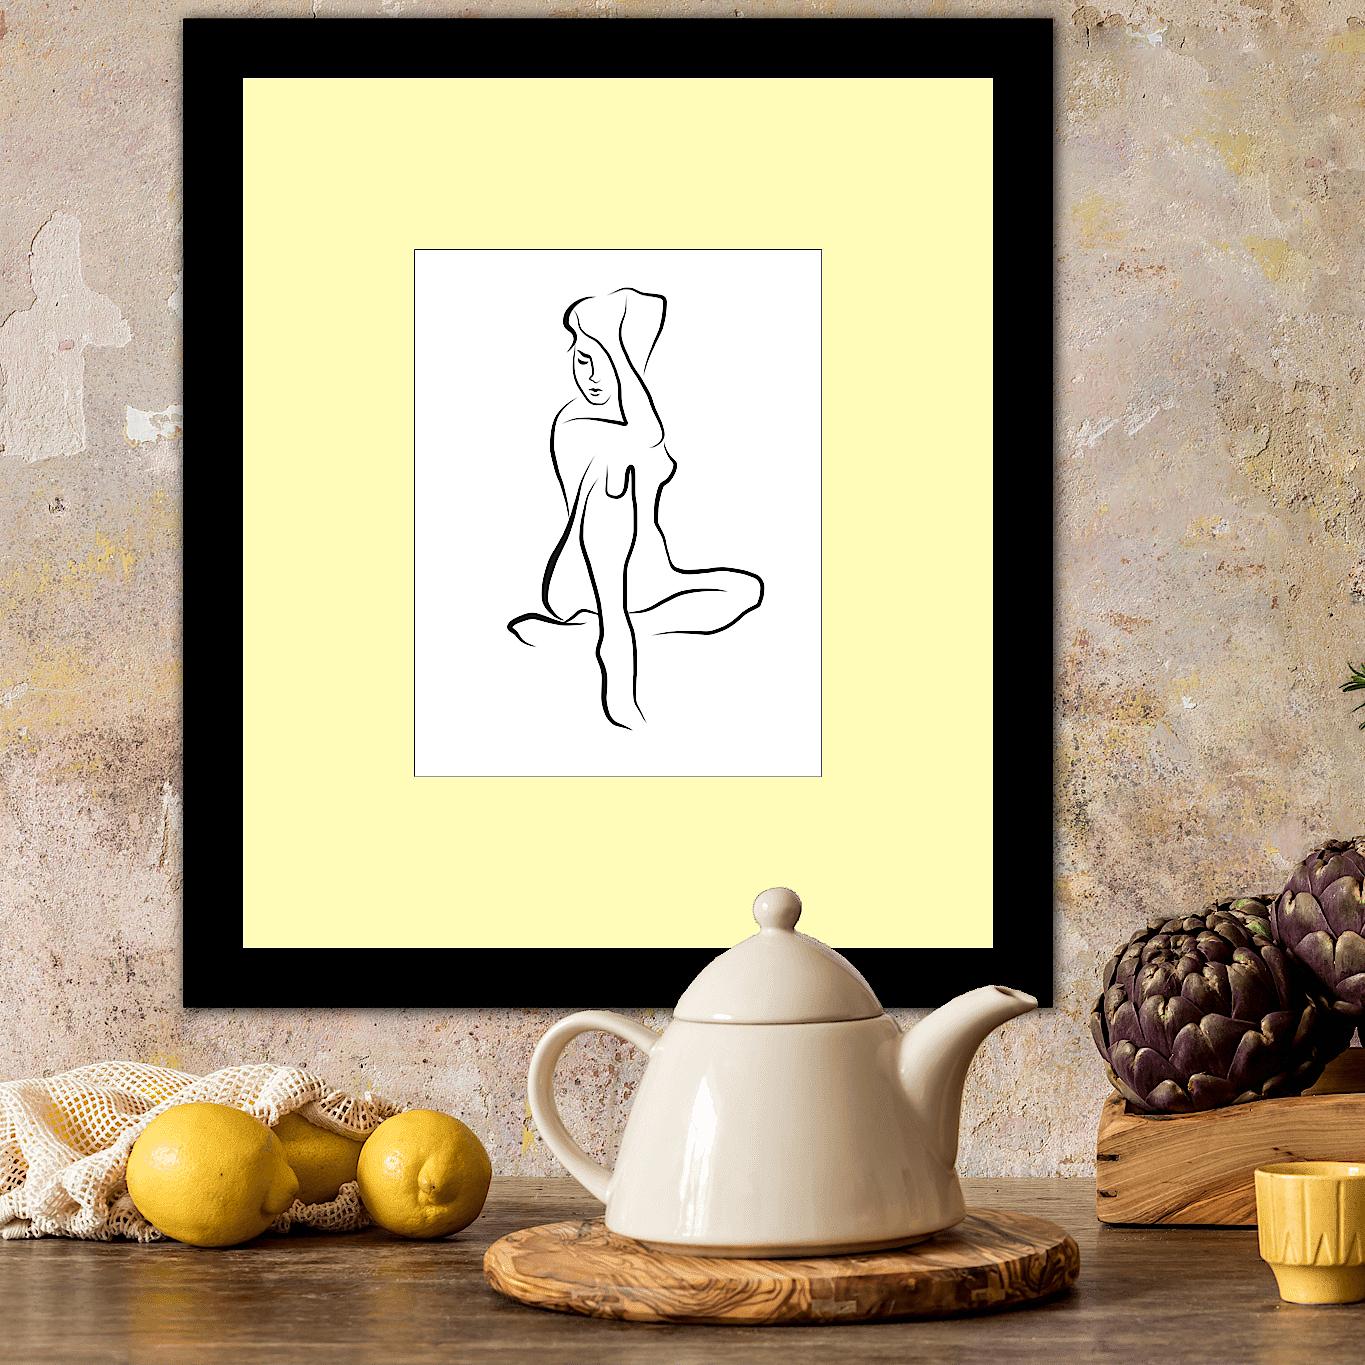 Haiku #41, 1/50 - Digital Vector Drawing Sitting Female Nude Woman Figure Deep T

This is a limited edition (50) digital black & white print of a seated female nude, executed in 17 vector lines. It is part of a series called Haiku, after the style